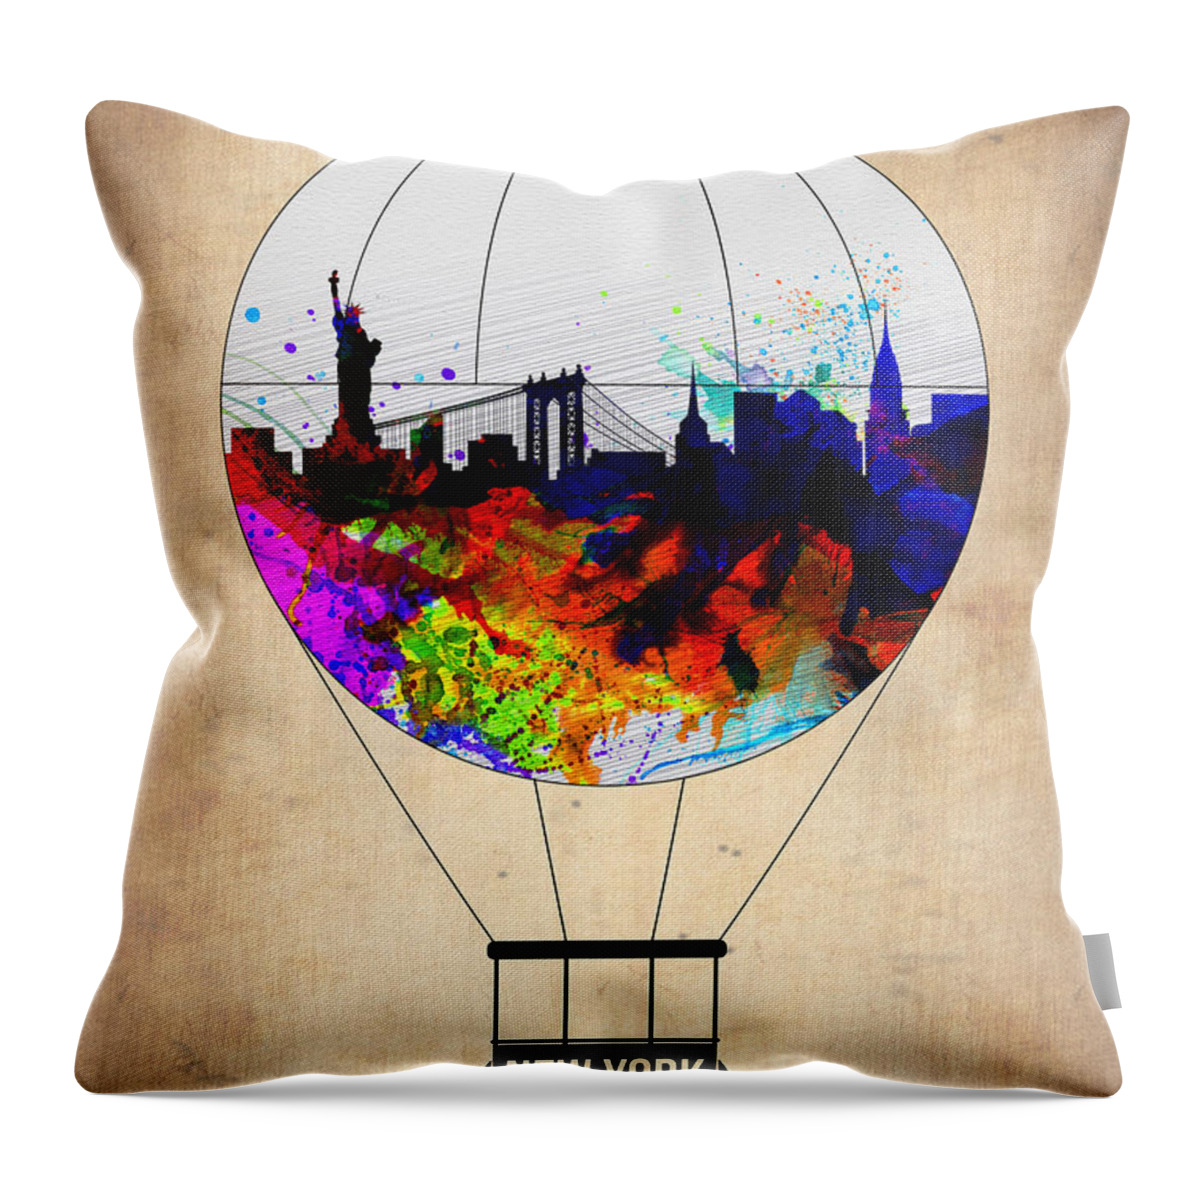 New York Throw Pillow featuring the painting New York Air Balloon by Naxart Studio